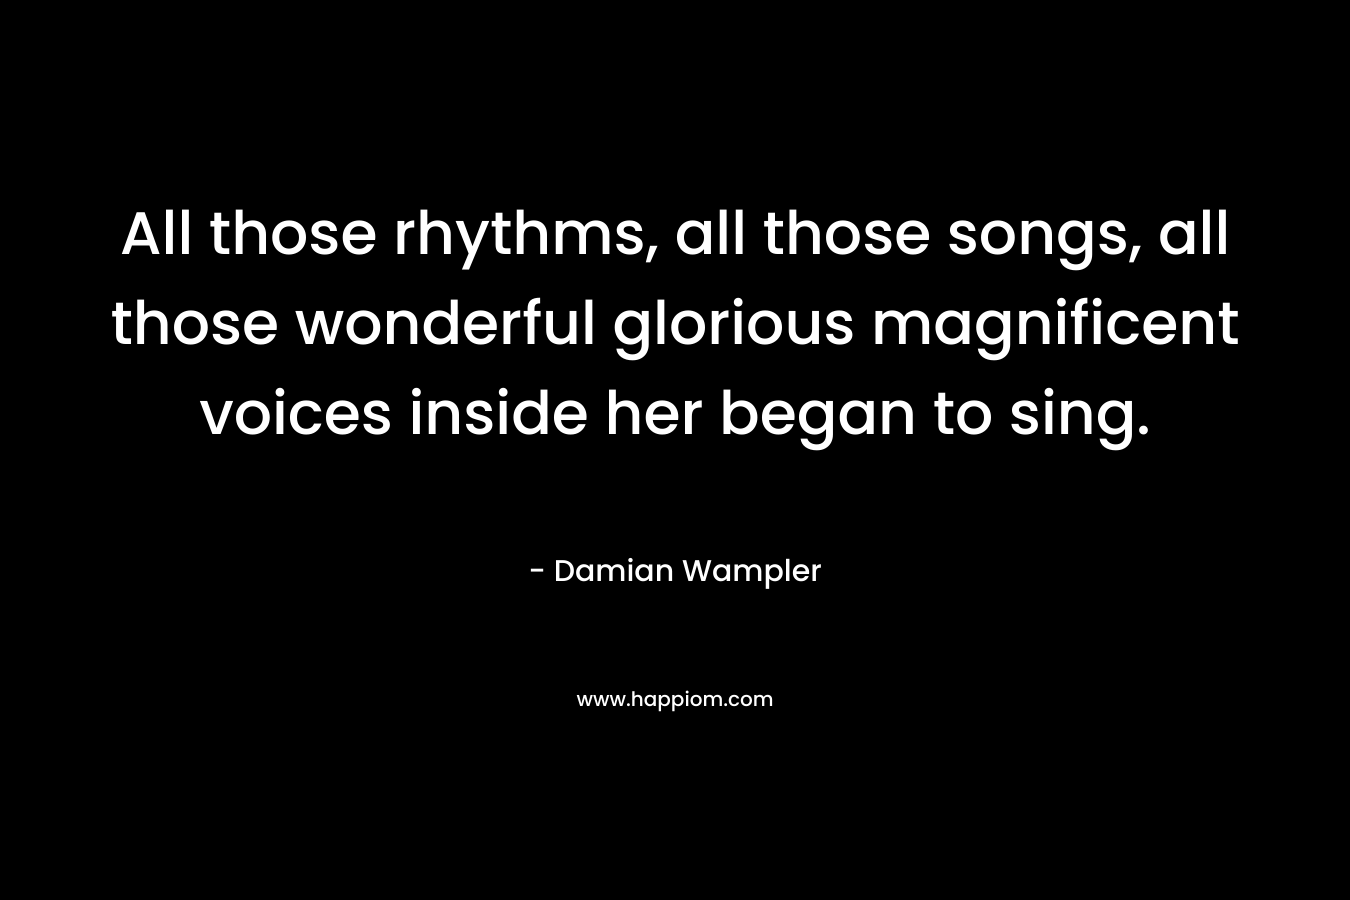 All those rhythms, all those songs, all those wonderful glorious magnificent voices inside her began to sing.